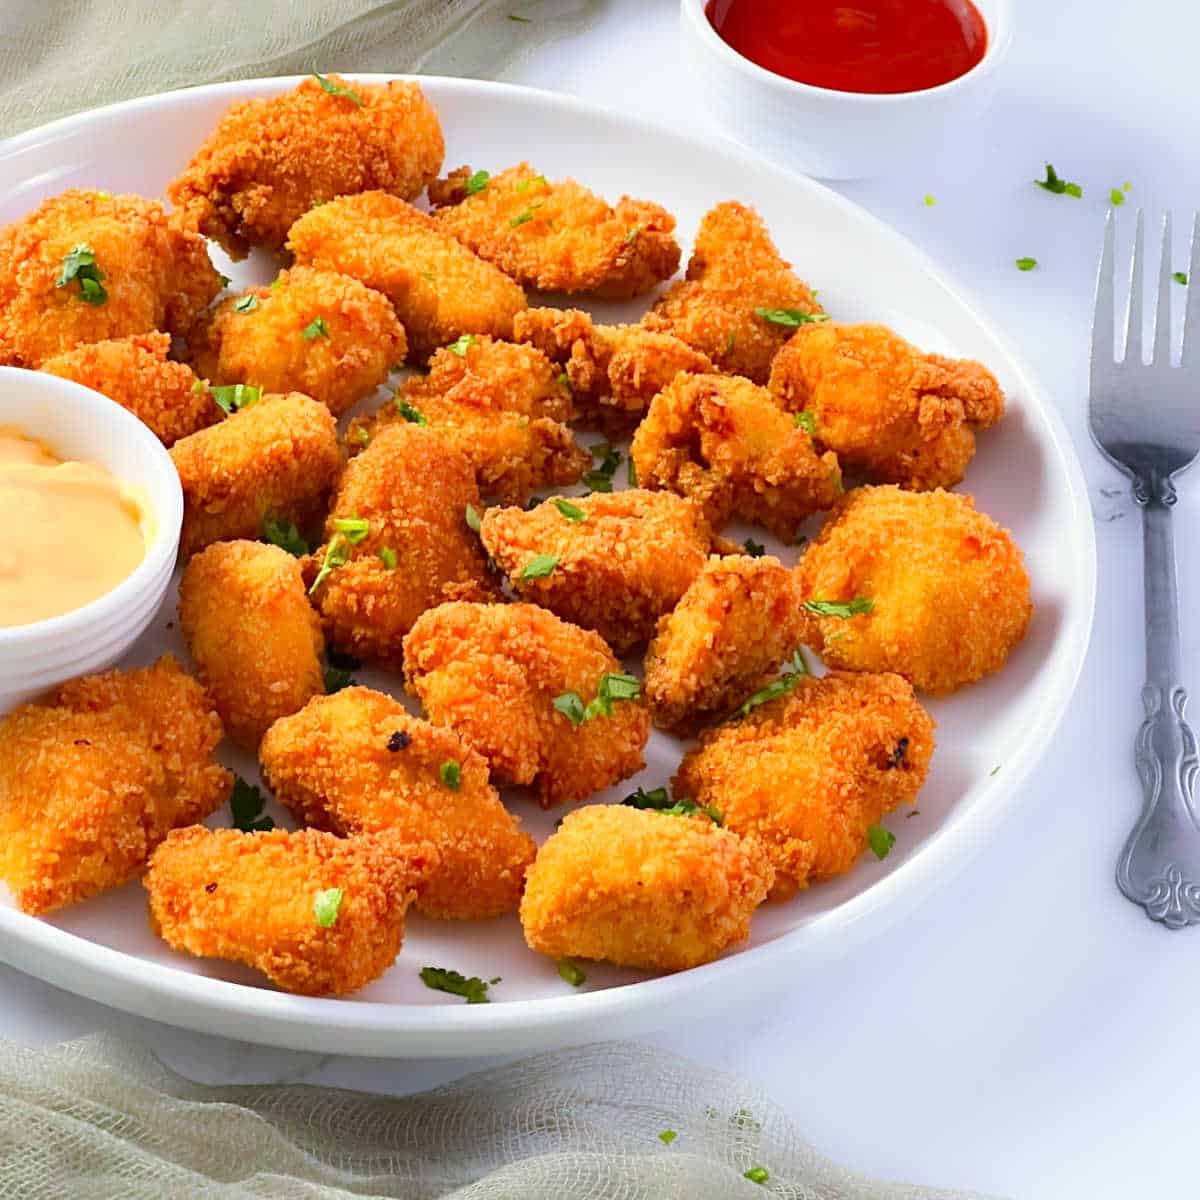 Chicken nuggets placed on a white plate.